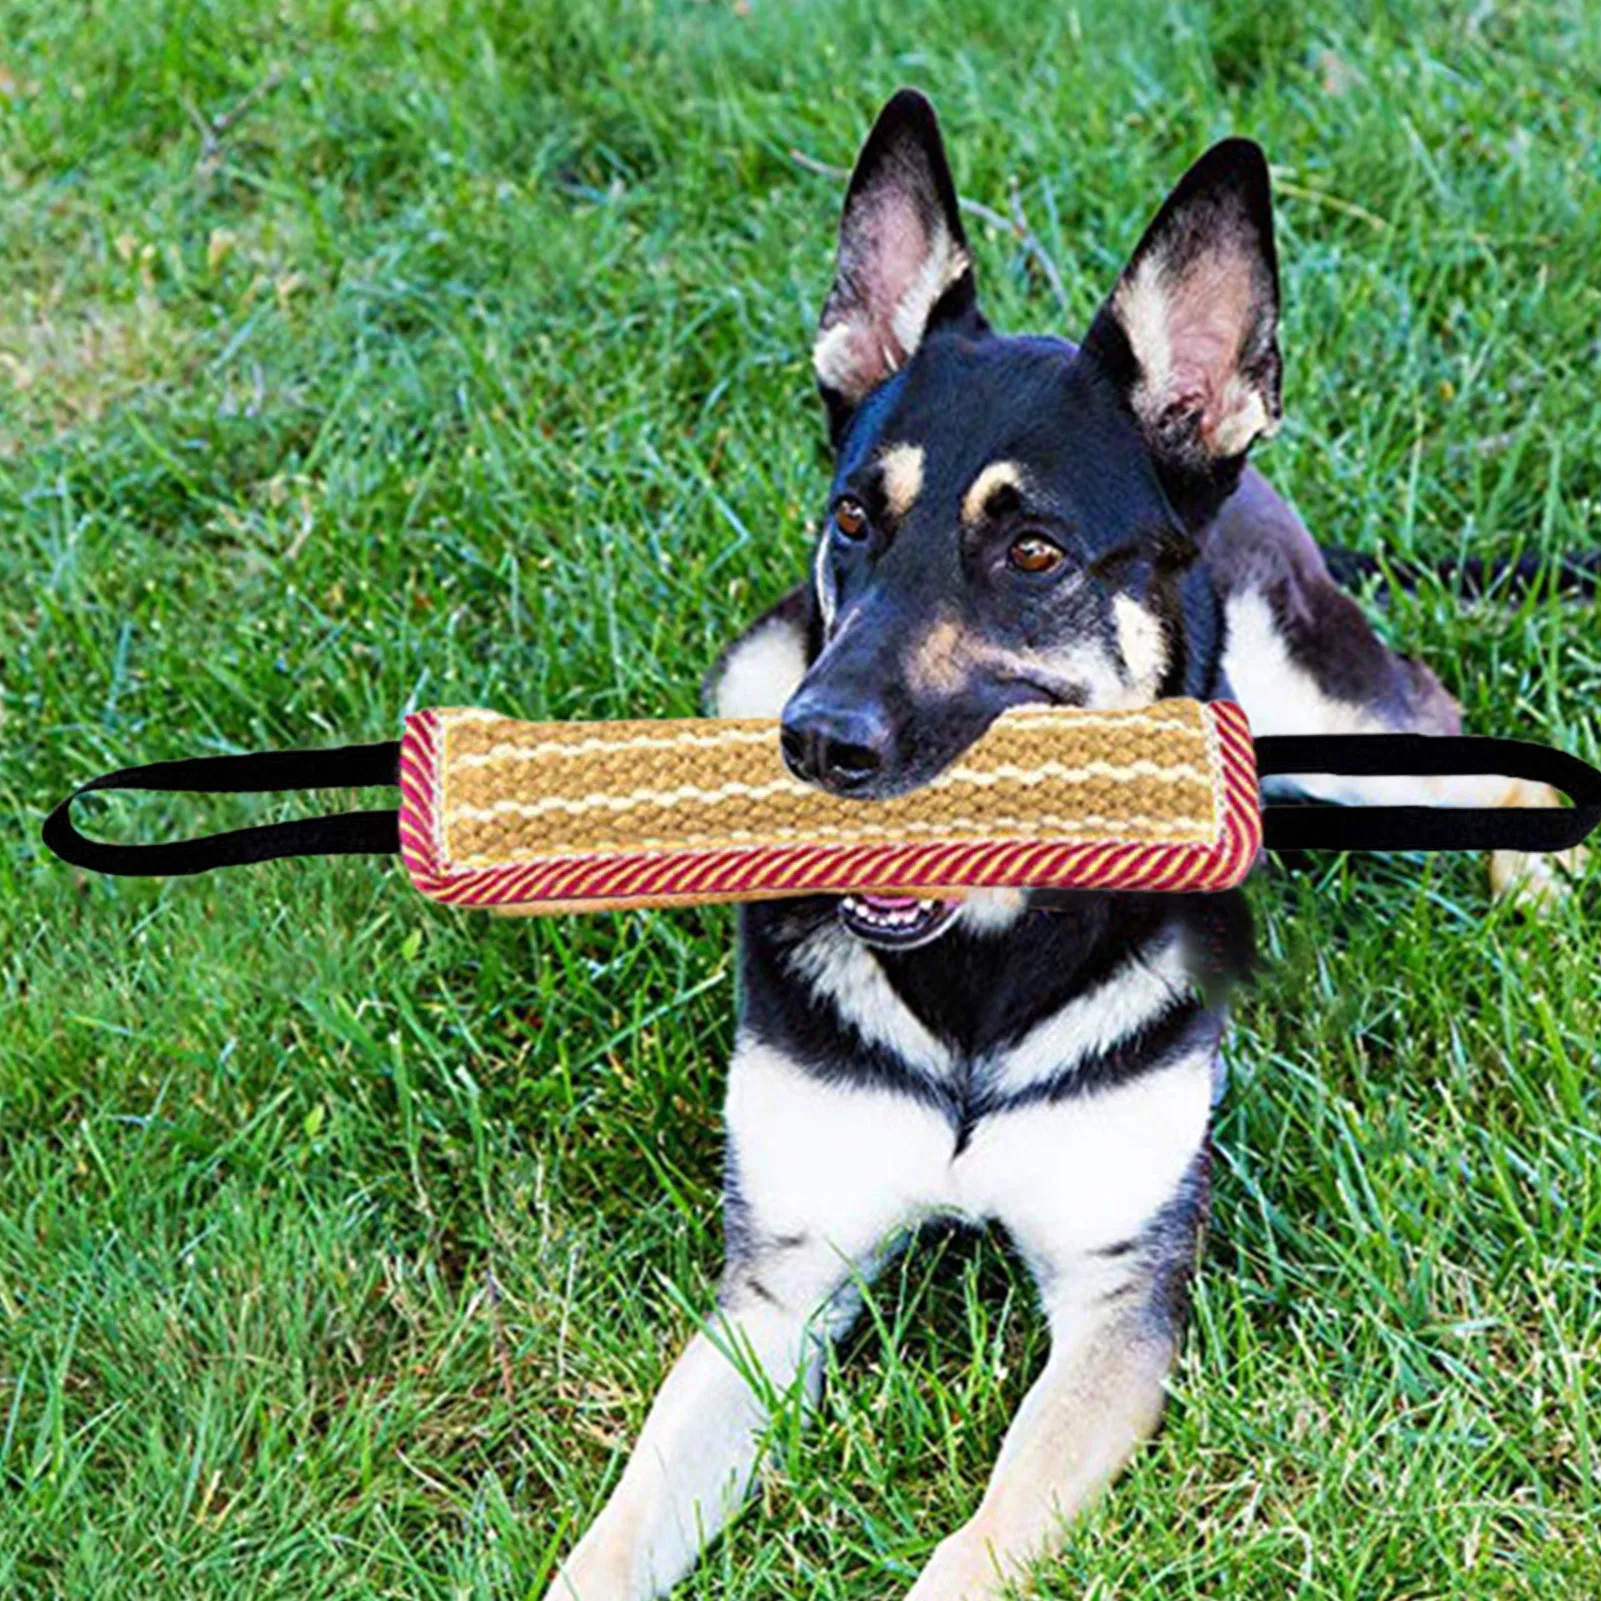 https://ae01.alicdn.com/kf/S57890f3fb90d4e14a4718099e2e9ef89c/Dog-Biti-Jute-Pillow-Tug-Toy-With-2-Handles-Durable-Dog-Training-Interactive-Toys-For-Indoor.jpg